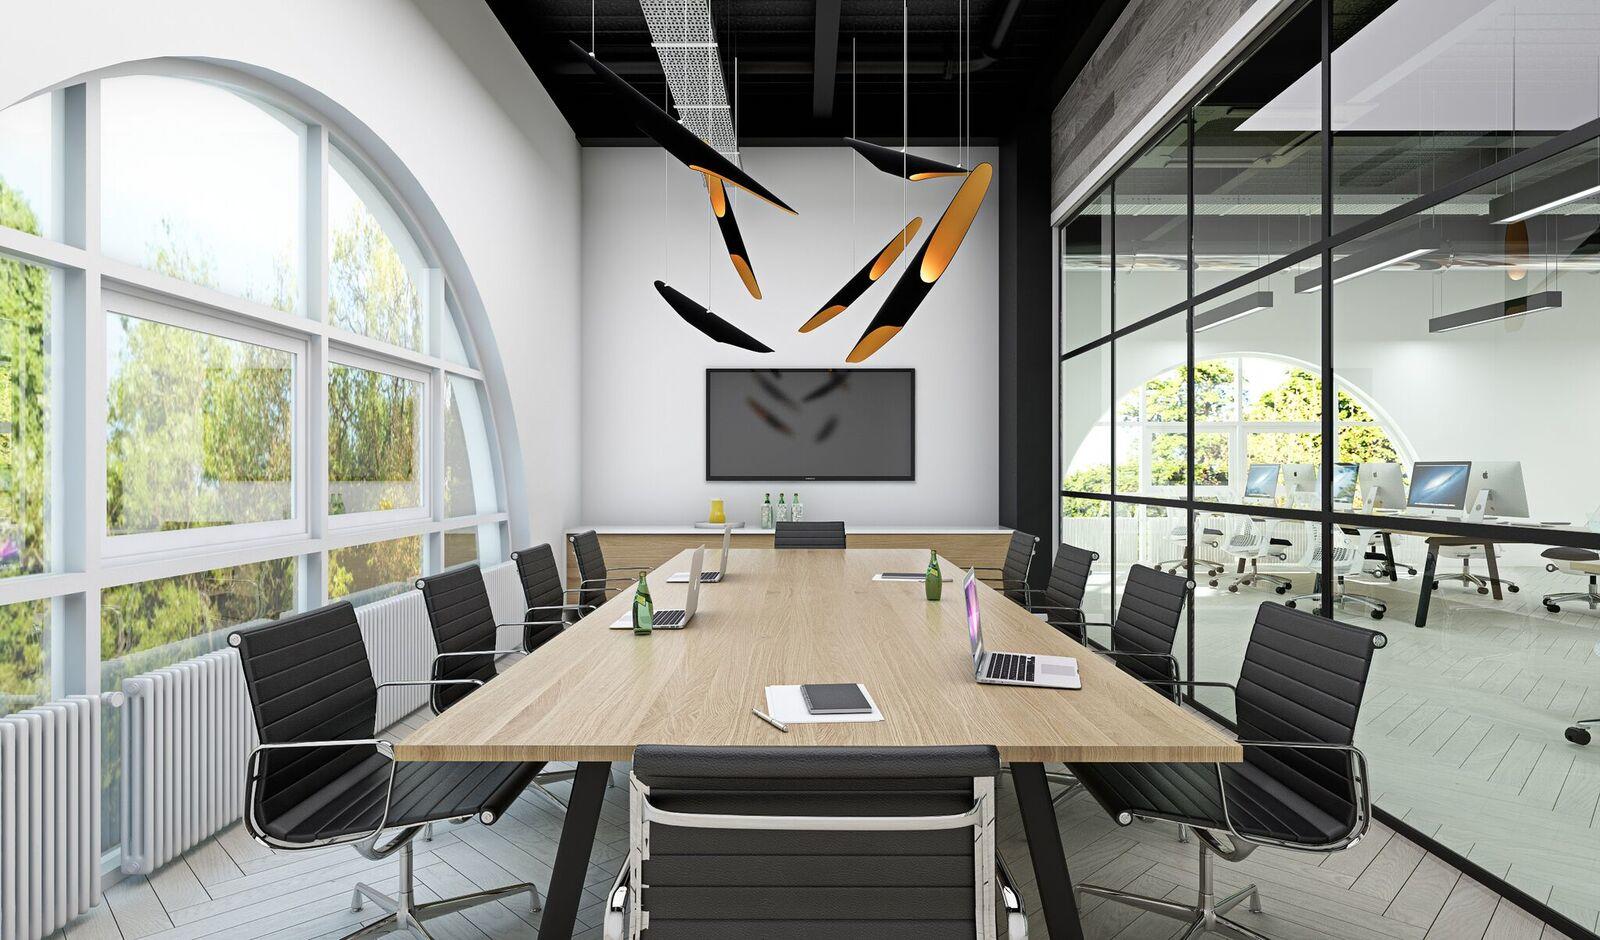 Meeting room interior design by CCWS office designers London